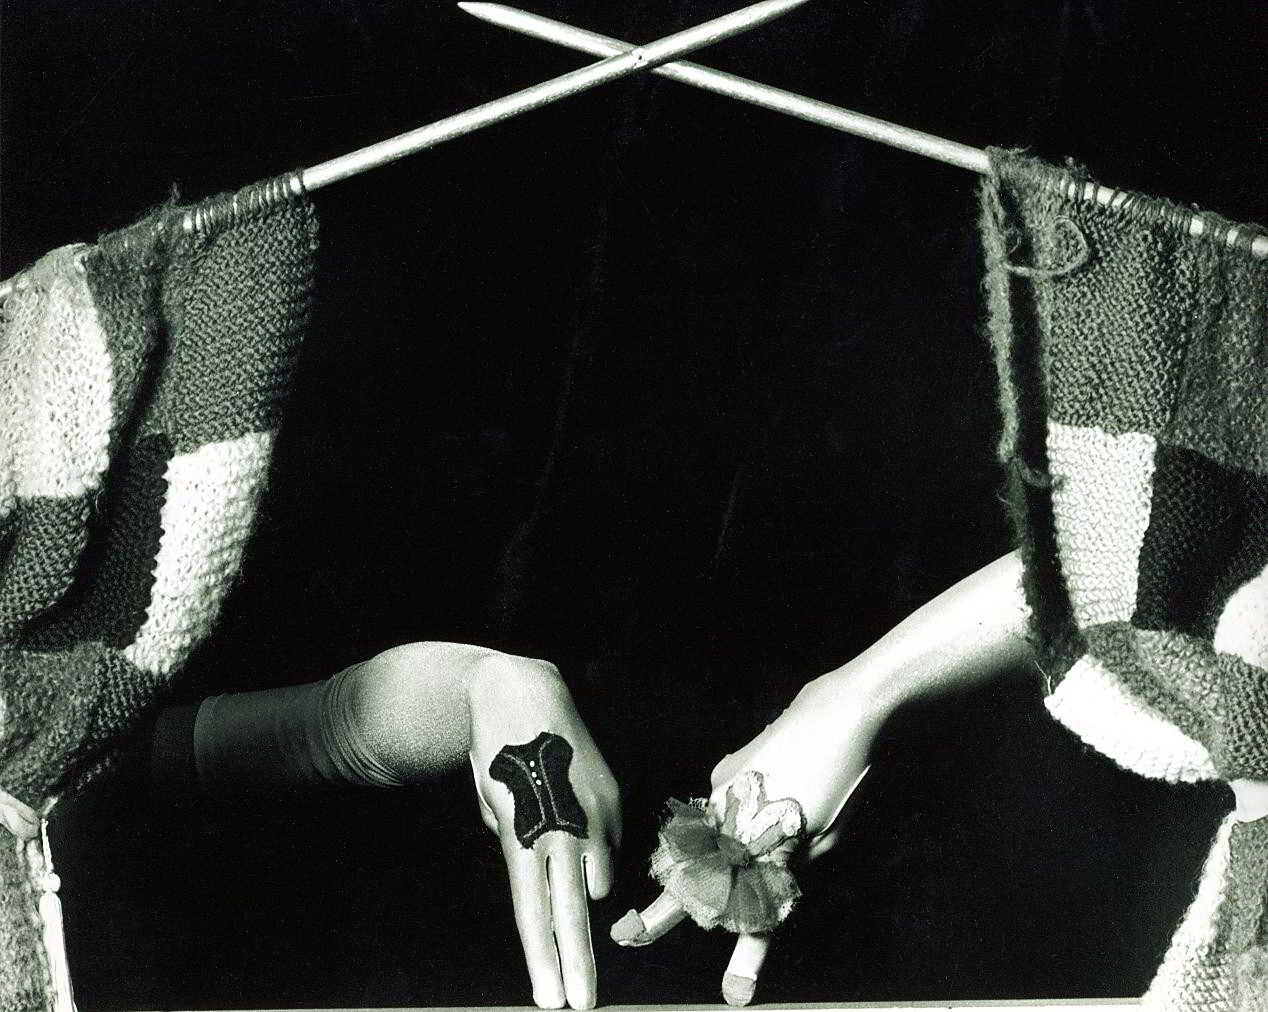 Handspan Theatre Out for A Duck curtain of knitting on needles with dressed fingers dancing